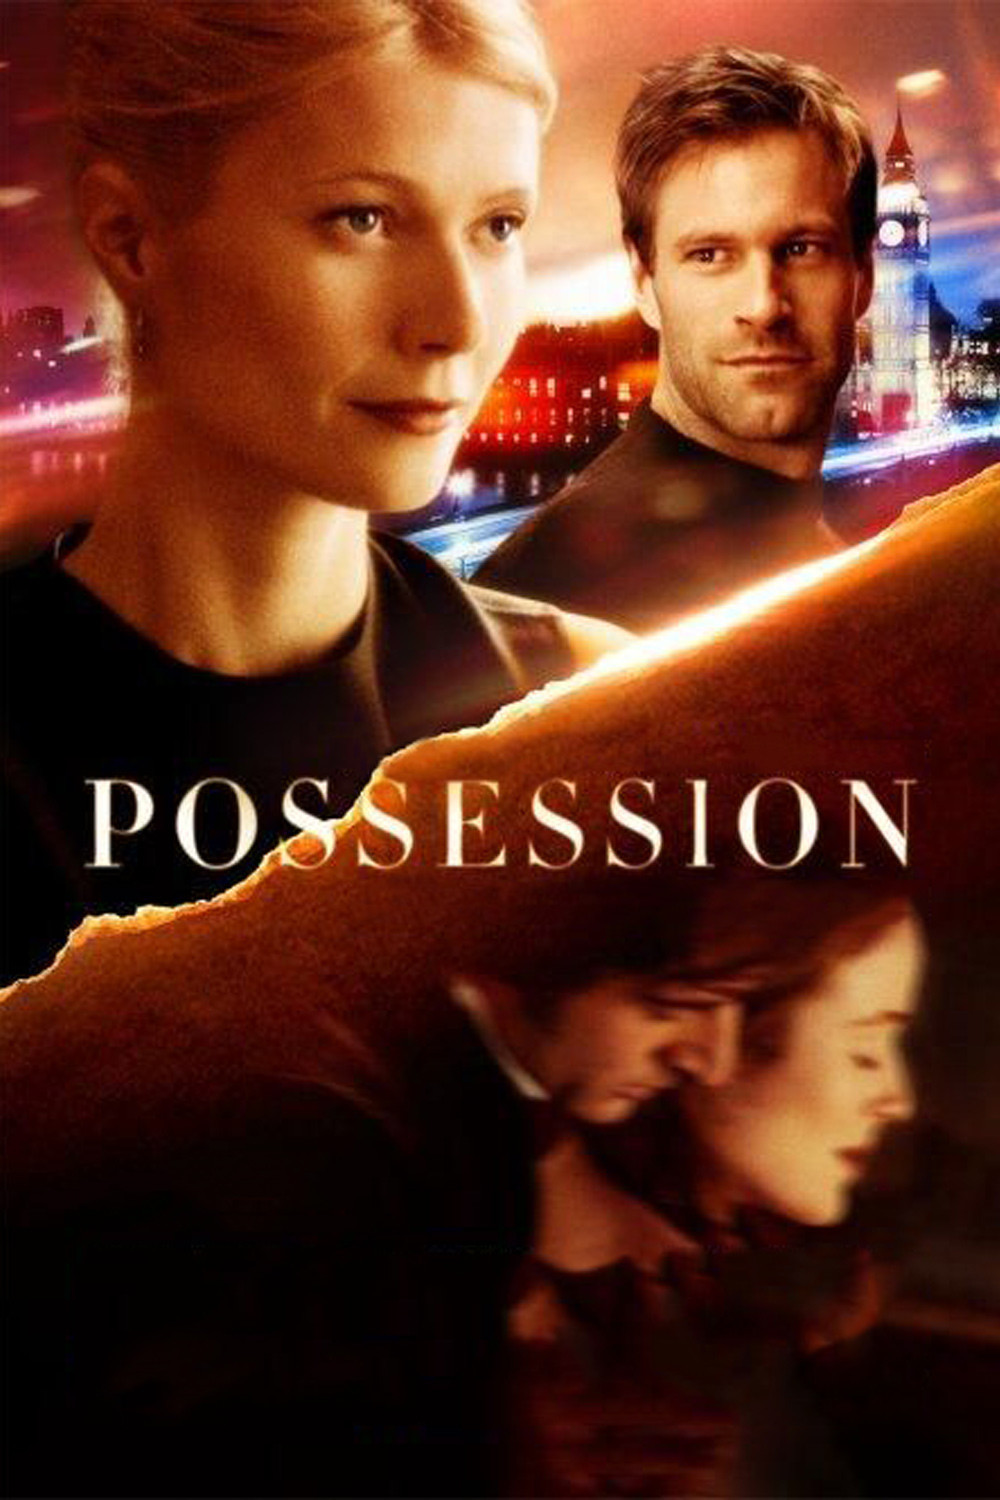 Poster for the movie "Possession"